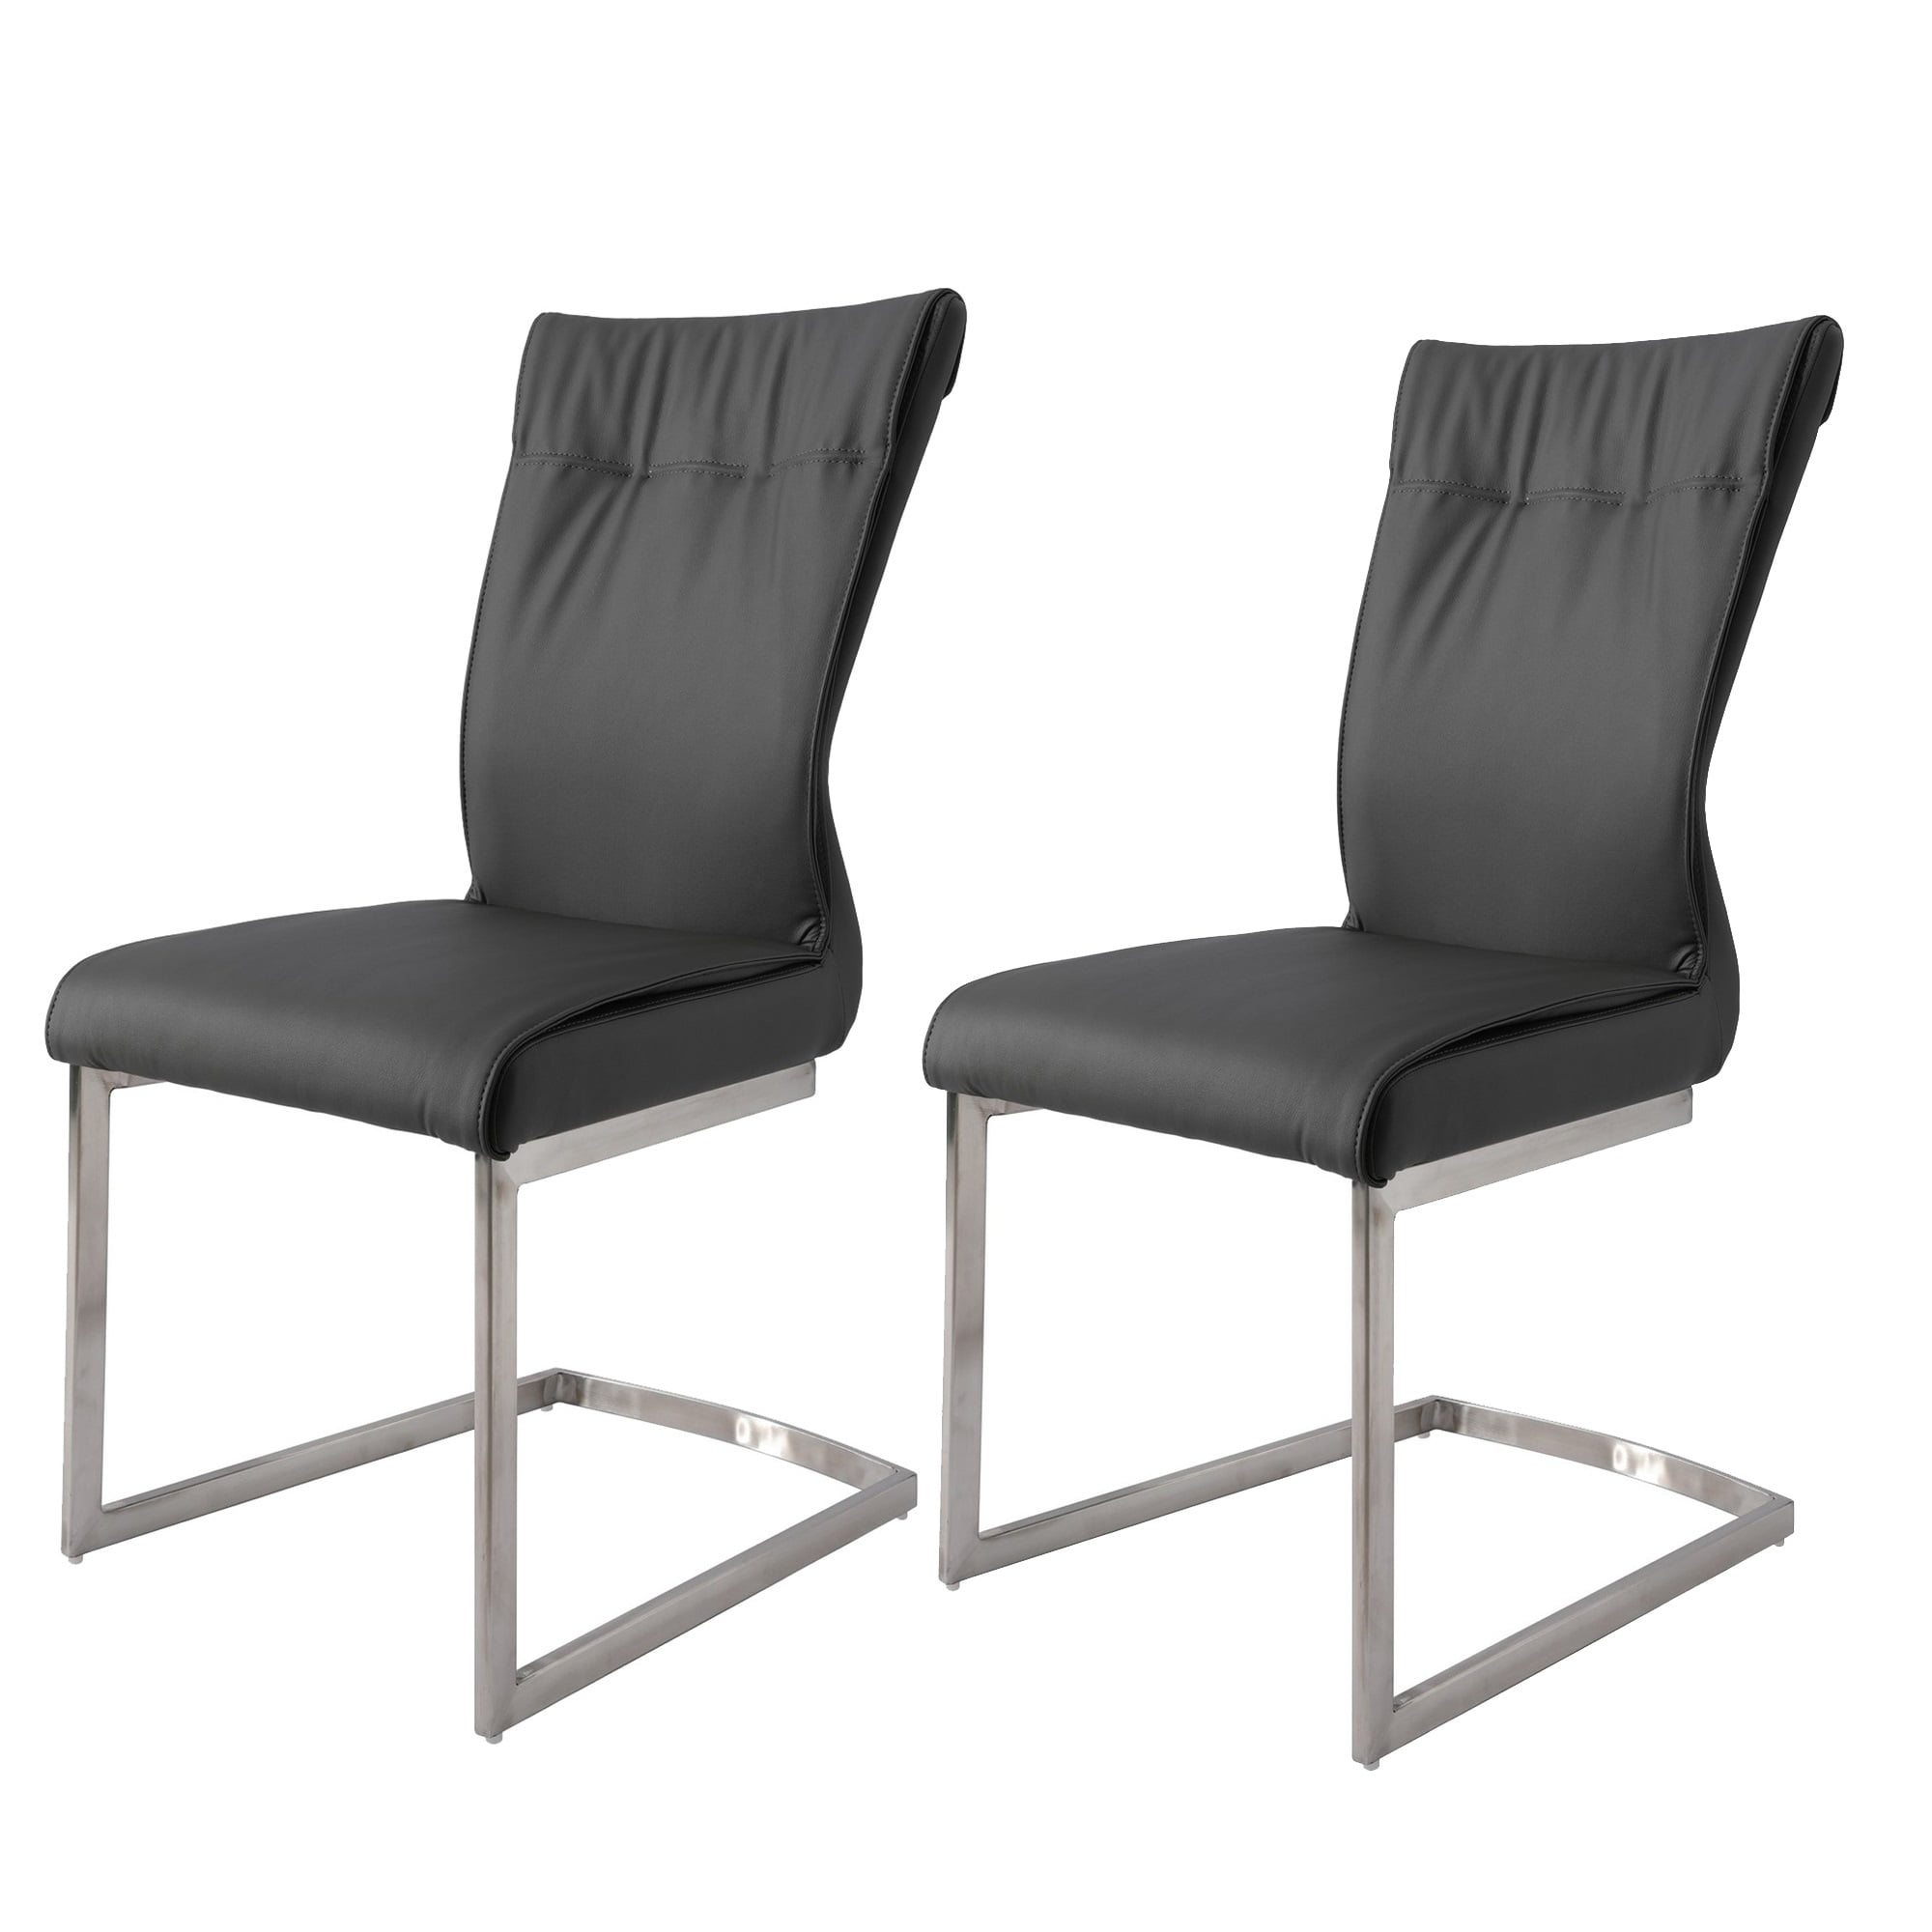 Leatherette Dining Chair With Breuer, Breuer Style Dining Chairs